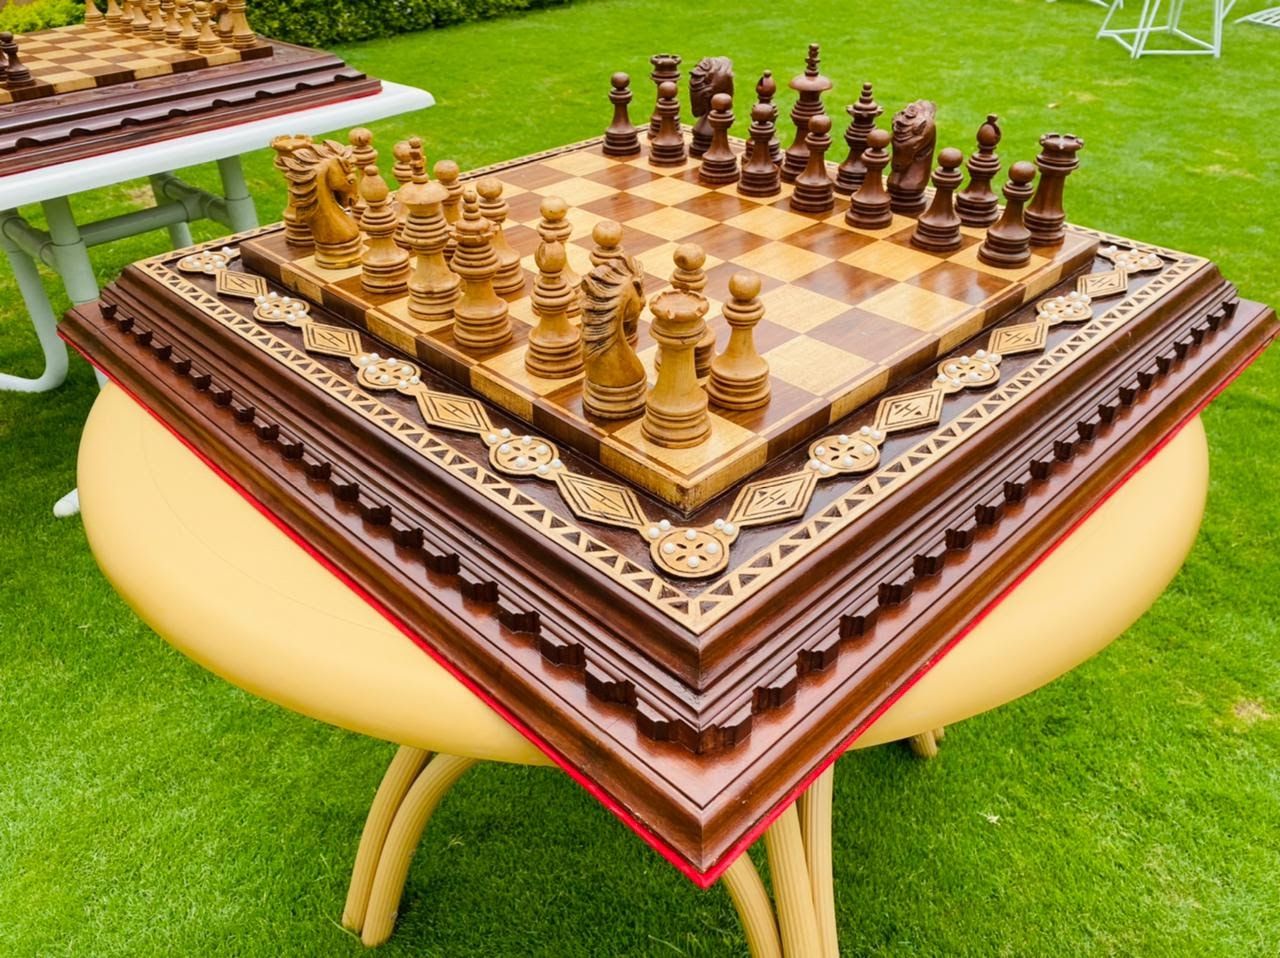 CE Wooden chess board – chess-evolution